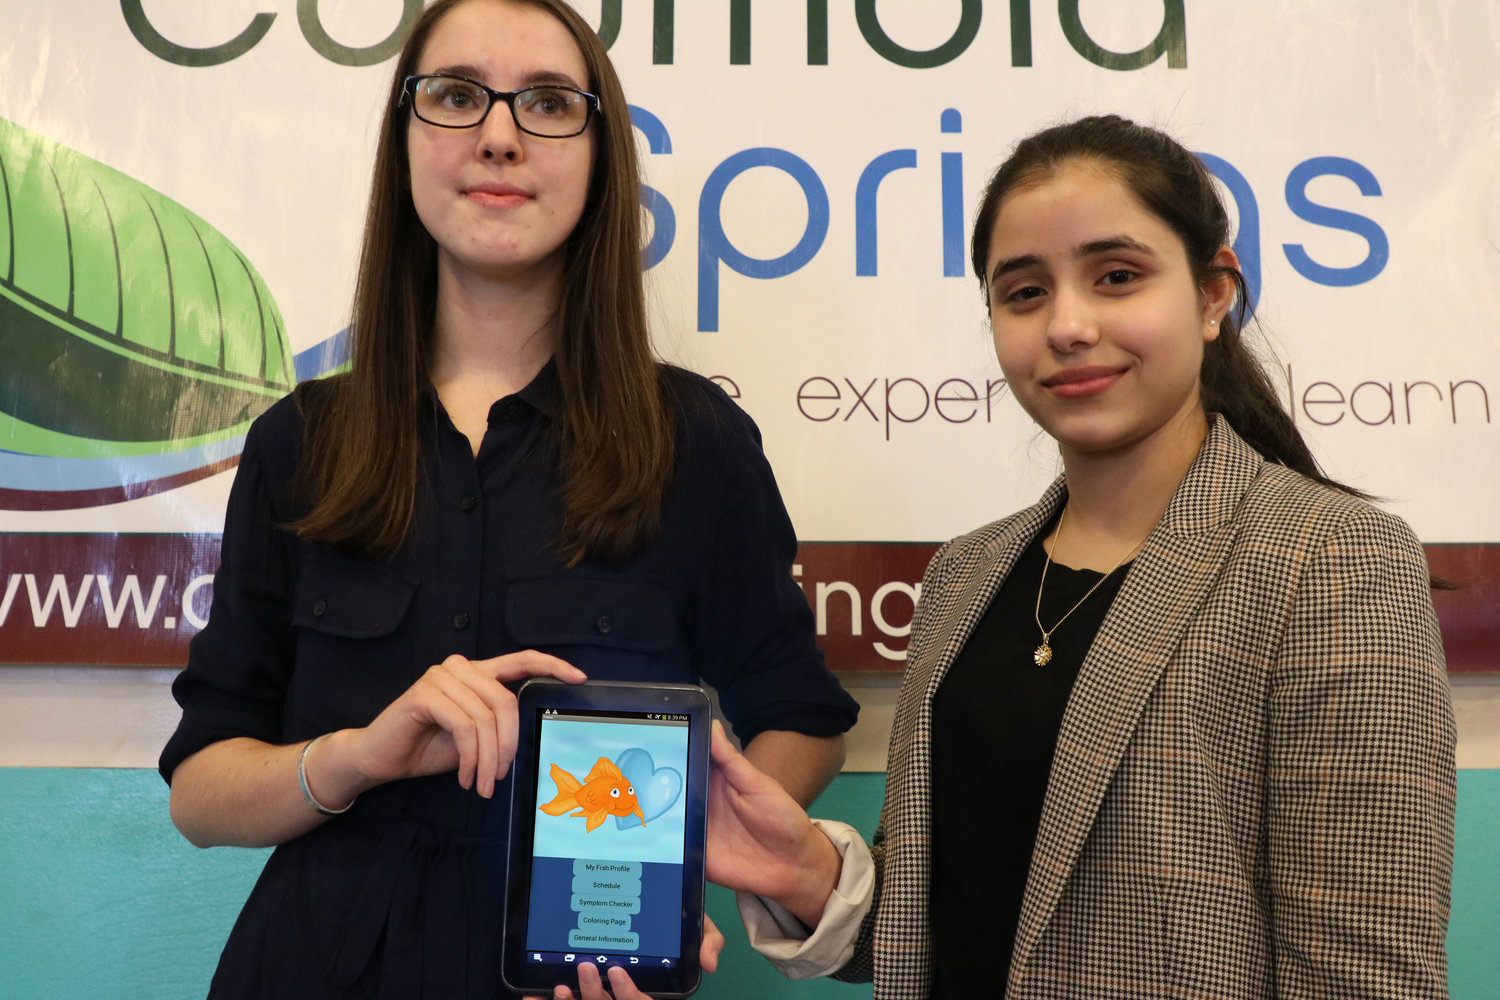 Skyview High School seniors Annika Epperly (right) and Ojasvi Kamboj (left) proudly present their app “Fin-damentals of Fish Care” at Columbia Springs when they won the 2018 Congressional App Challenge Feb. 20th.  